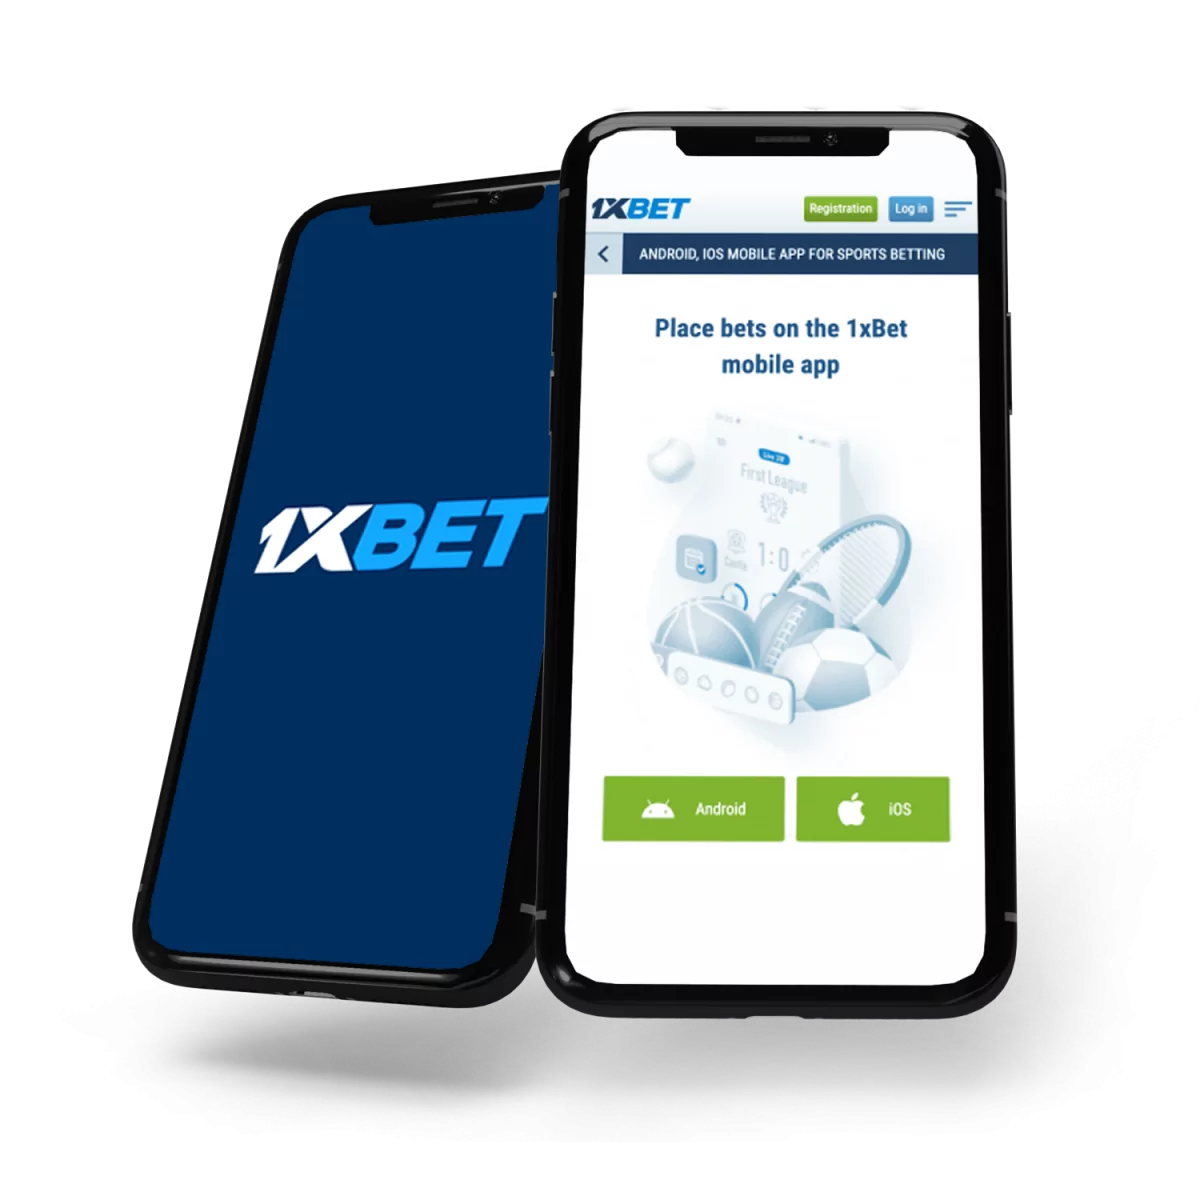 1xbet Is Crucial To Your Business. Learn Why!